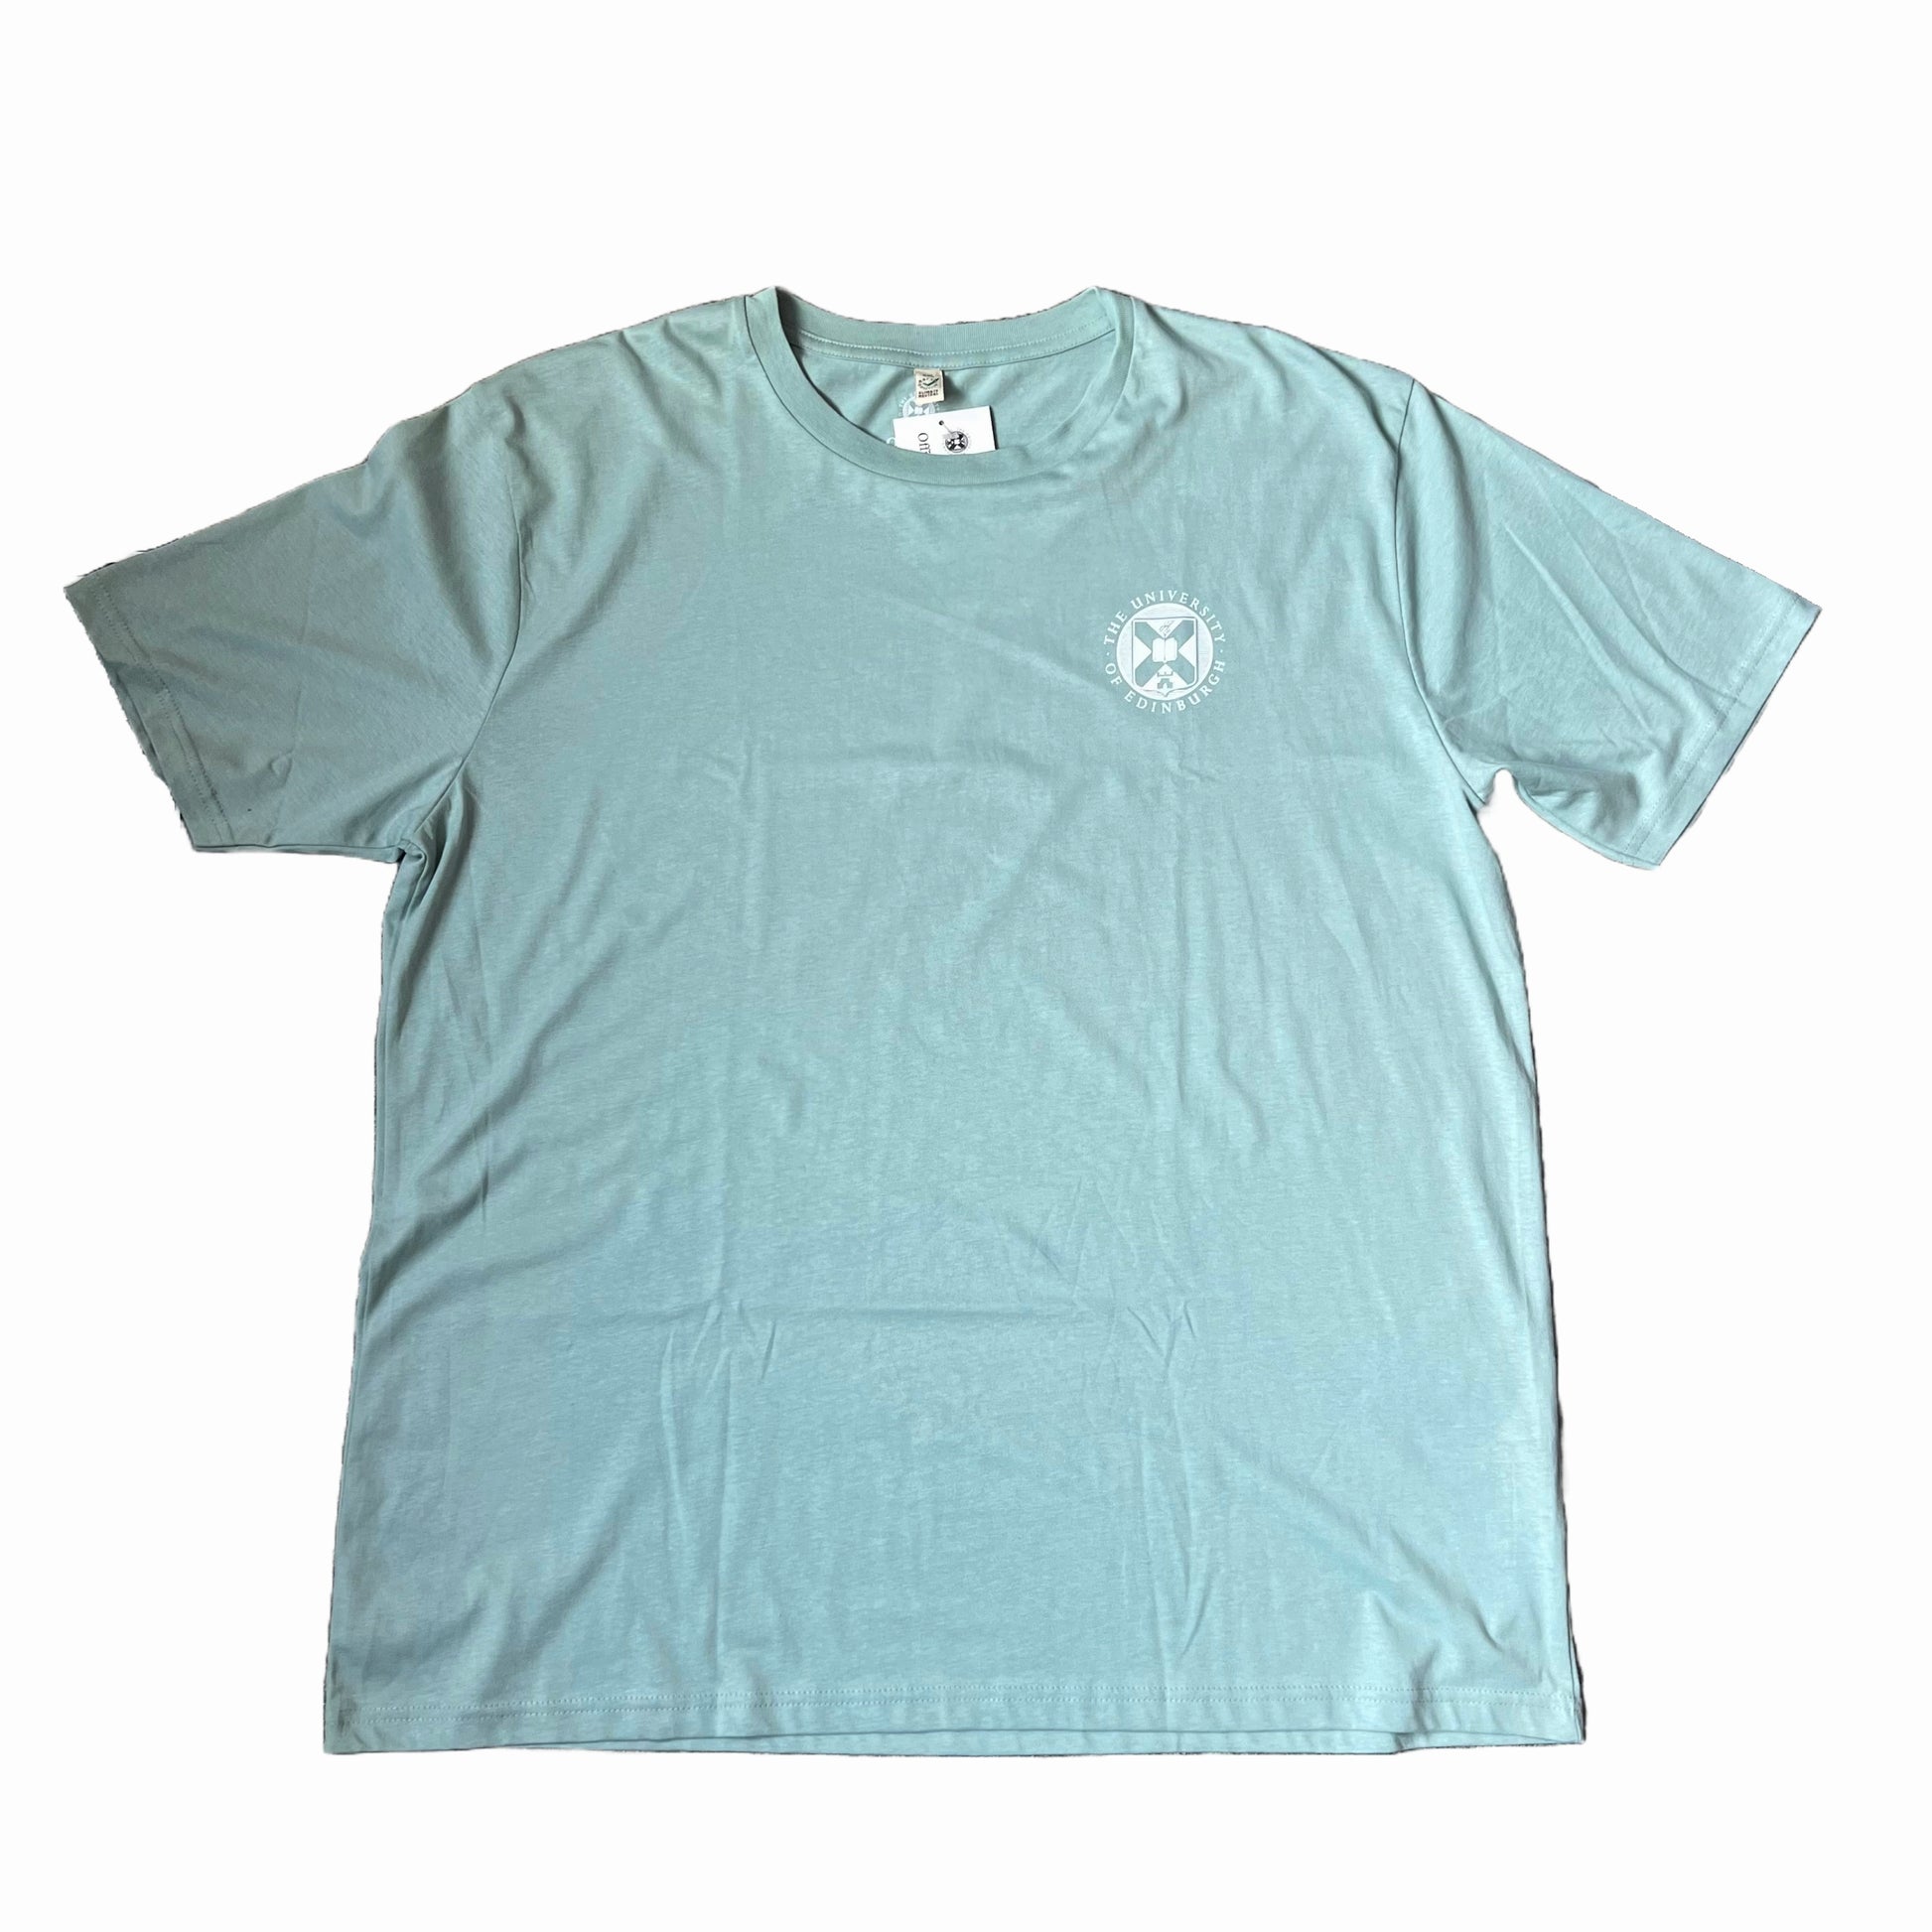 A light blue green t-shirt with the University crest printed in white